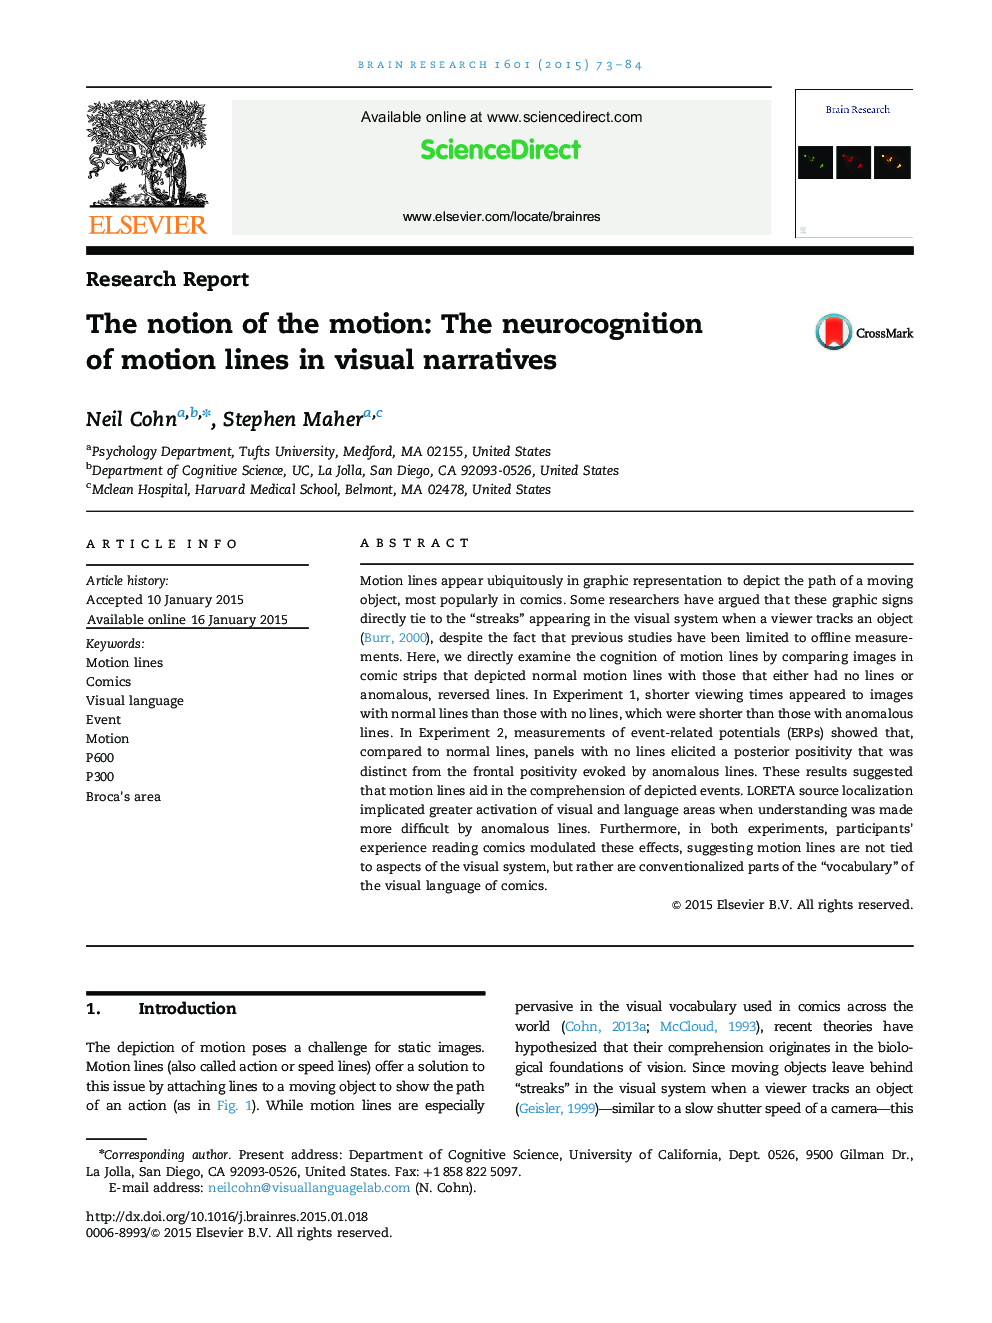 The notion of the motion: The neurocognition of motion lines in visual narratives